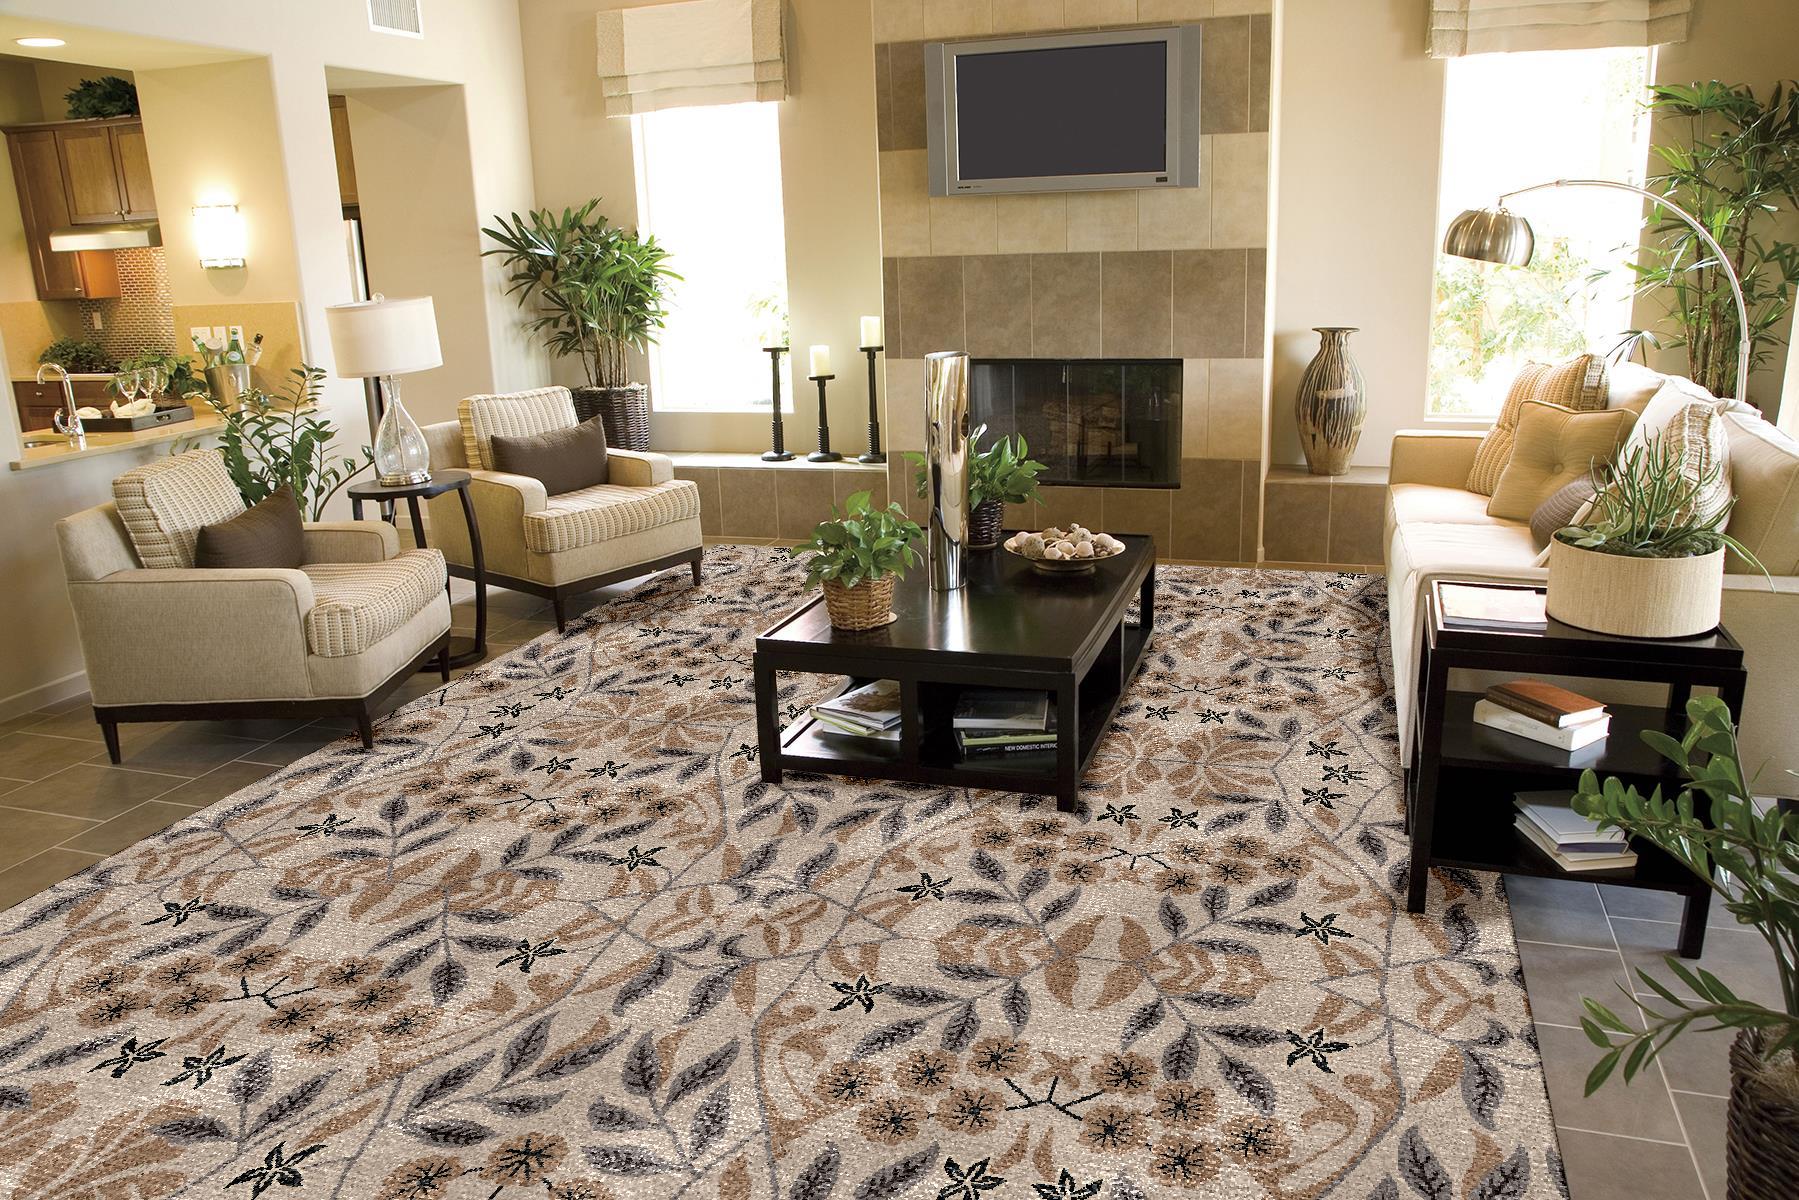 Why Are Carpets For Floor So Expensive?